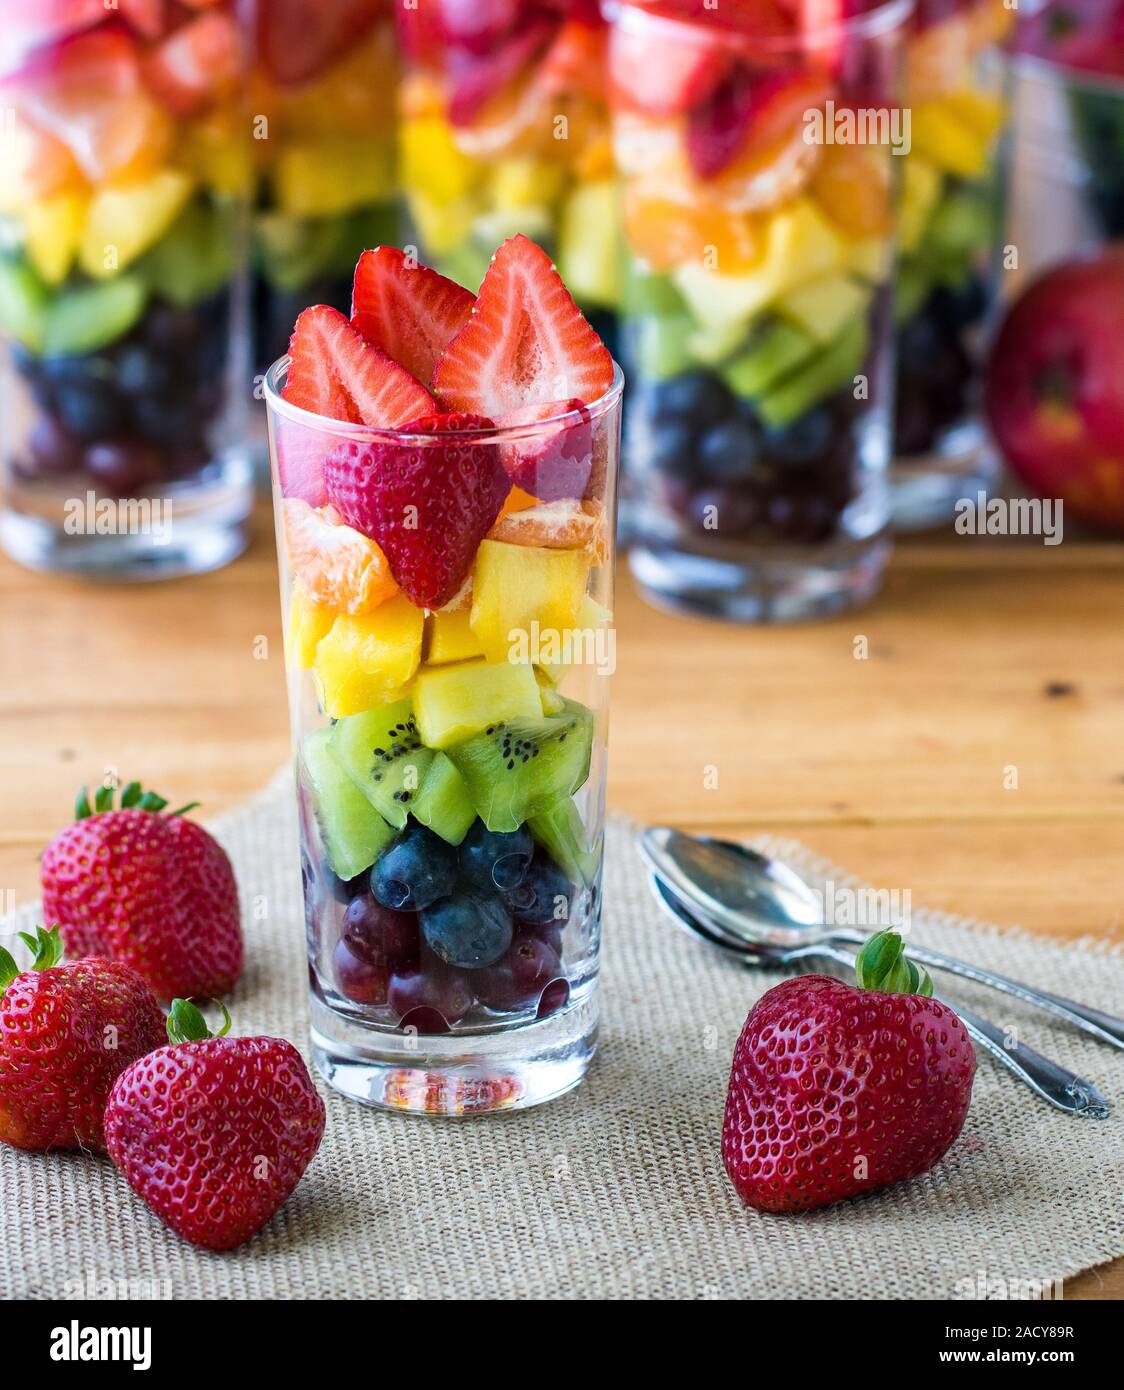 A close up view of a rainbow fruit parfait in a tall glass surrounded by strawberries and several rainbow parfaits in the background. Stock Photo